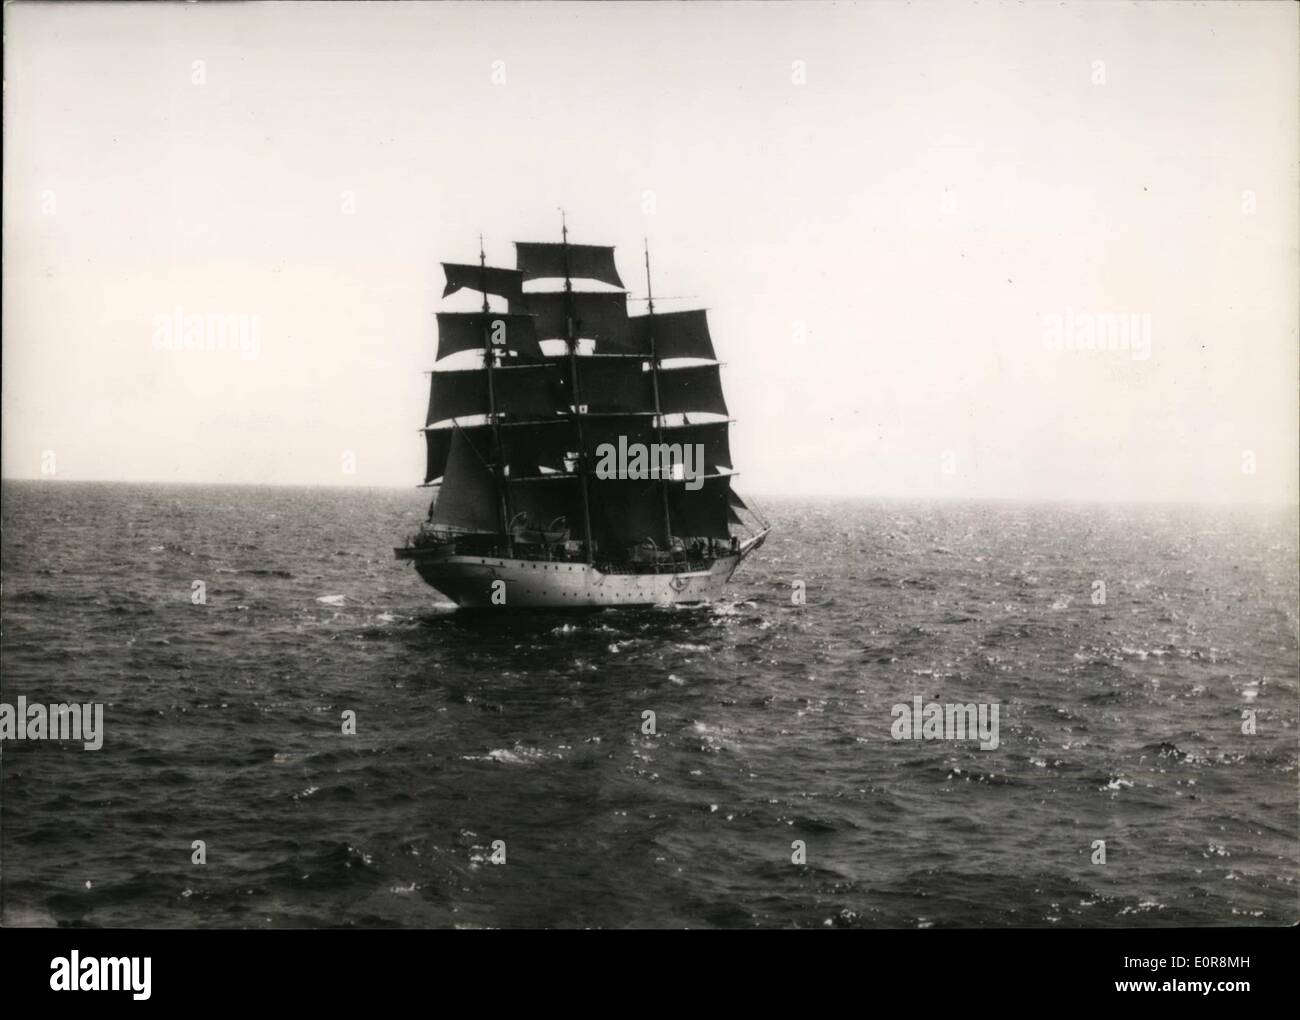 Aug. 08, 1958 - Shoolships in a Race Brest-Canary Islands: Schoolships of different nationalities are participating in a race from Brest to Canary Islands (1,390 miles). Photo shows The Portuguese Ship ''Sagres'' In high seas. Stock Photo